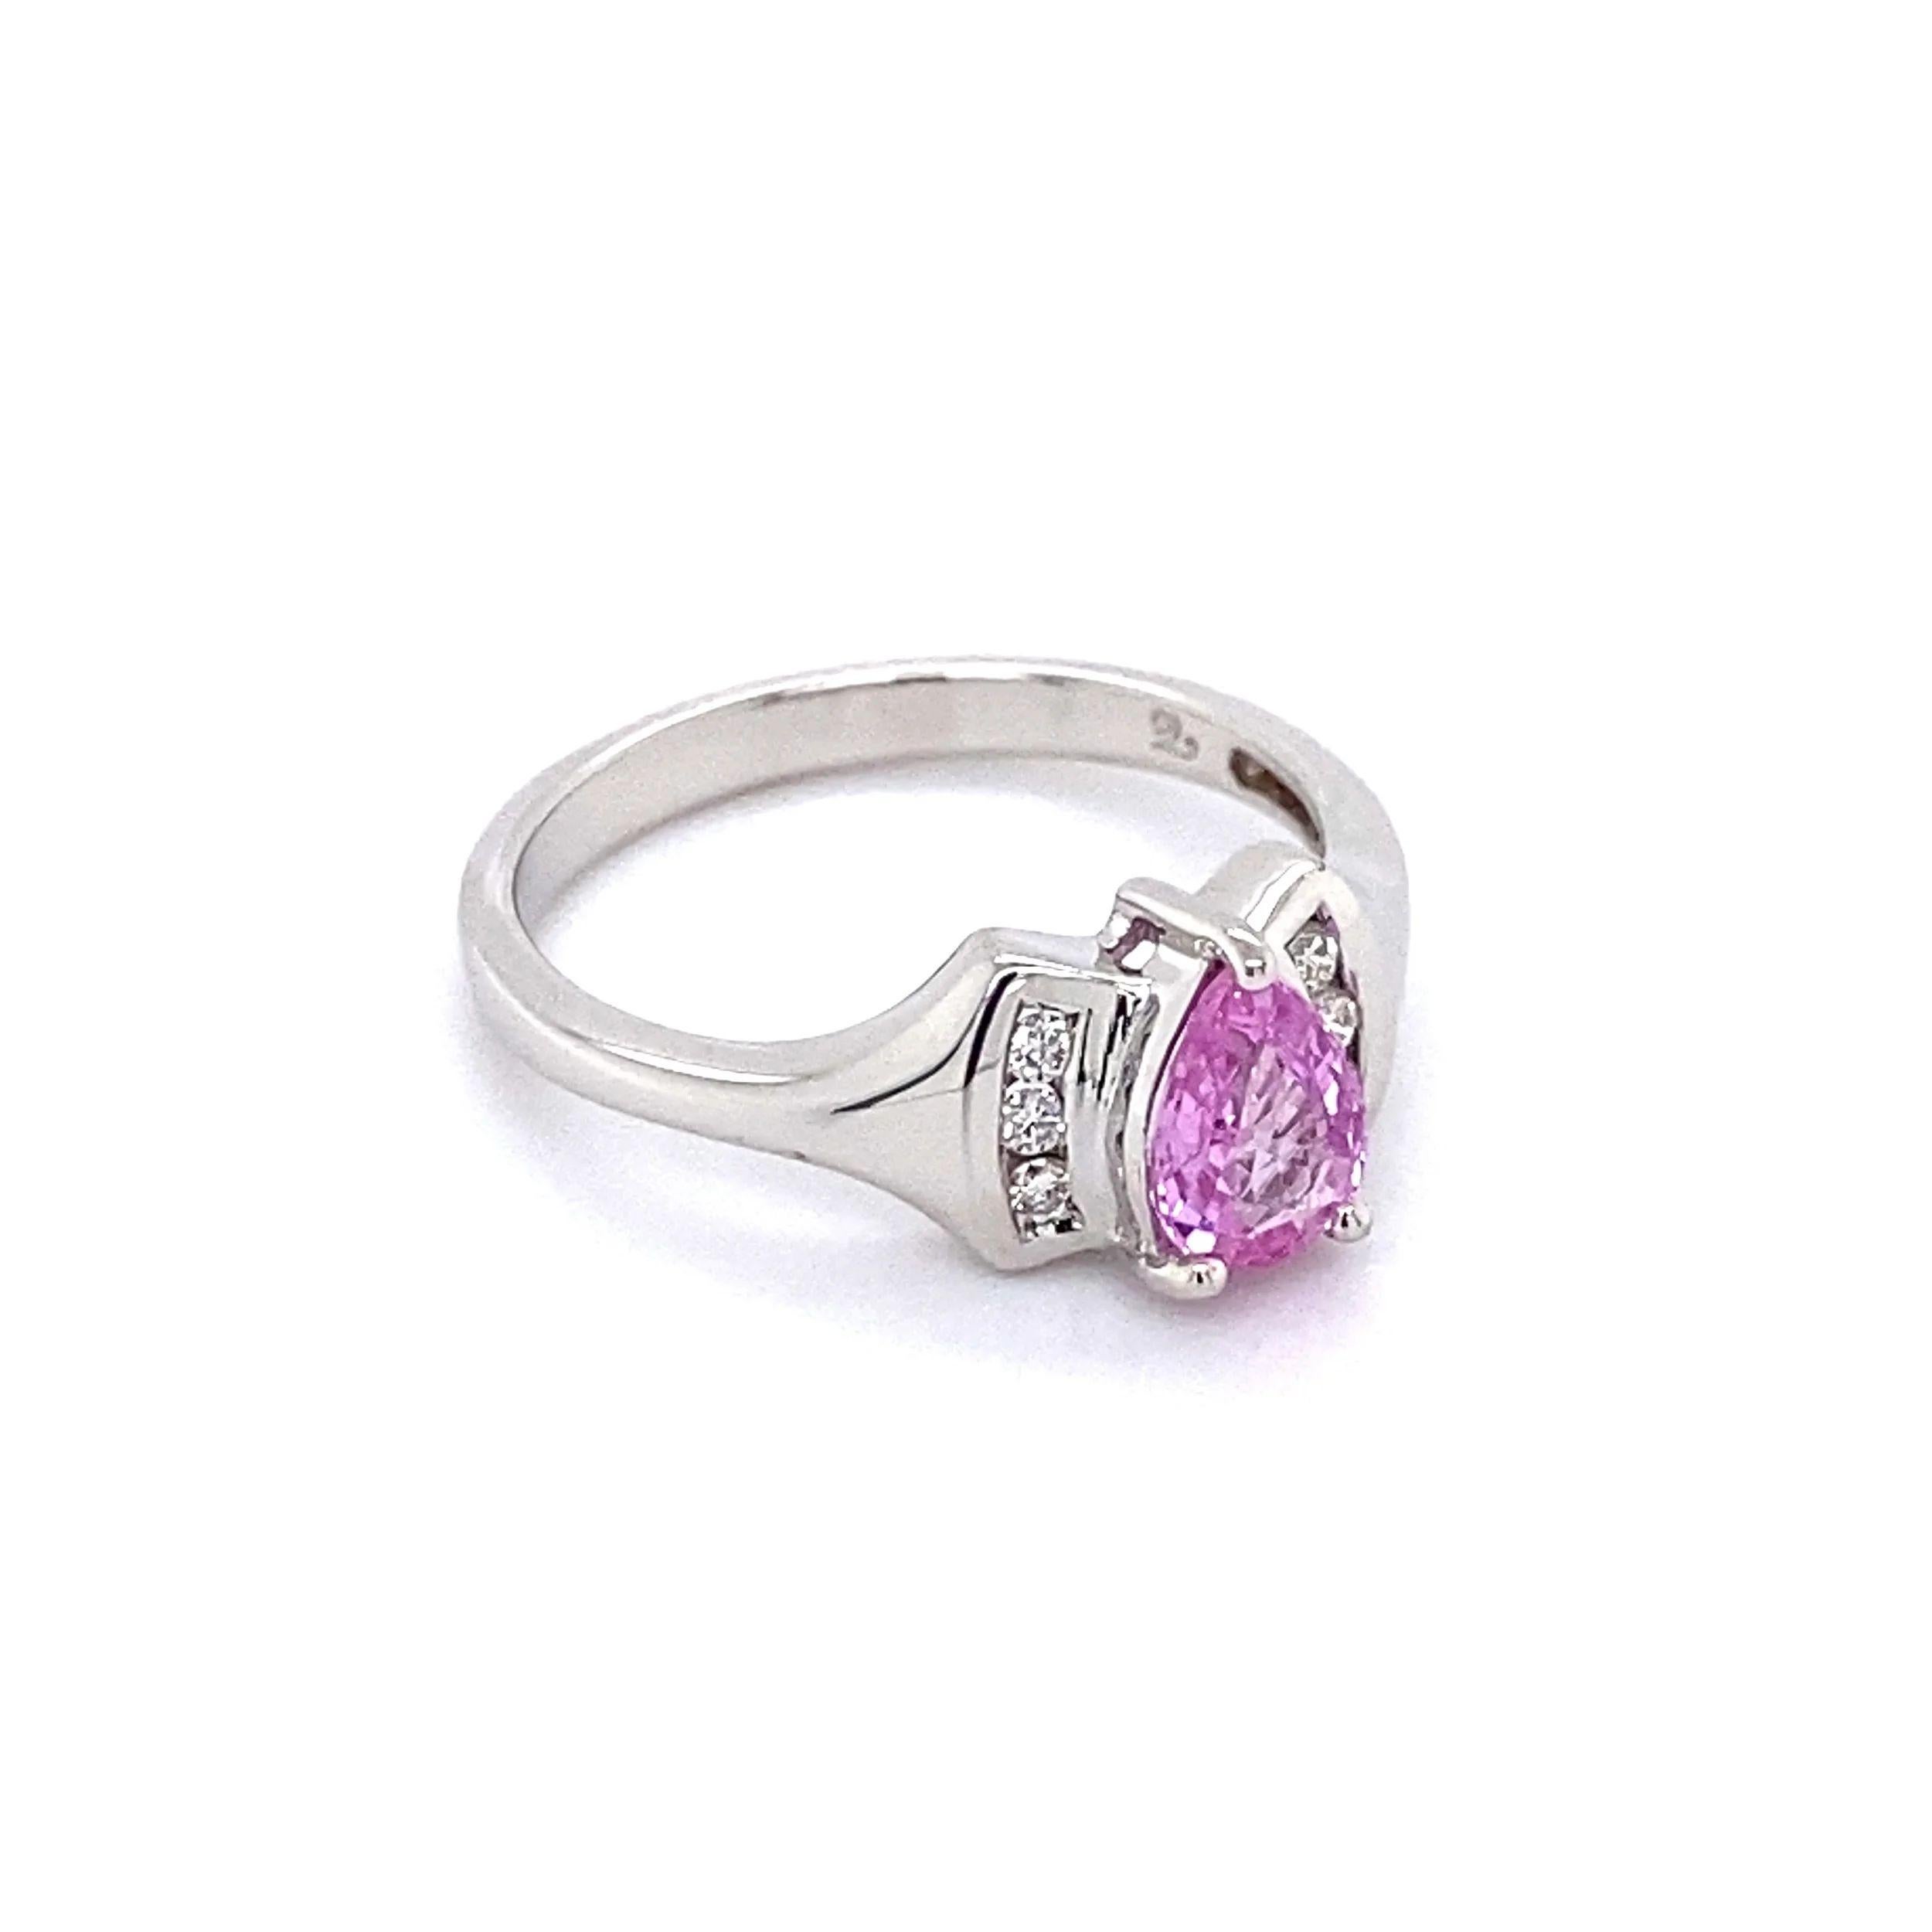 Simply Beautiful!  Pink Sapphire and Diamond Gold Band Cocktail Ring. Centering a securely nestled Hand set Pear shape Pink Sapphire, weighing approx. 0.50 Carat. Accented either side by Diamonds, approx. 0.06tcw. Hand crafted in 18K White Gold.